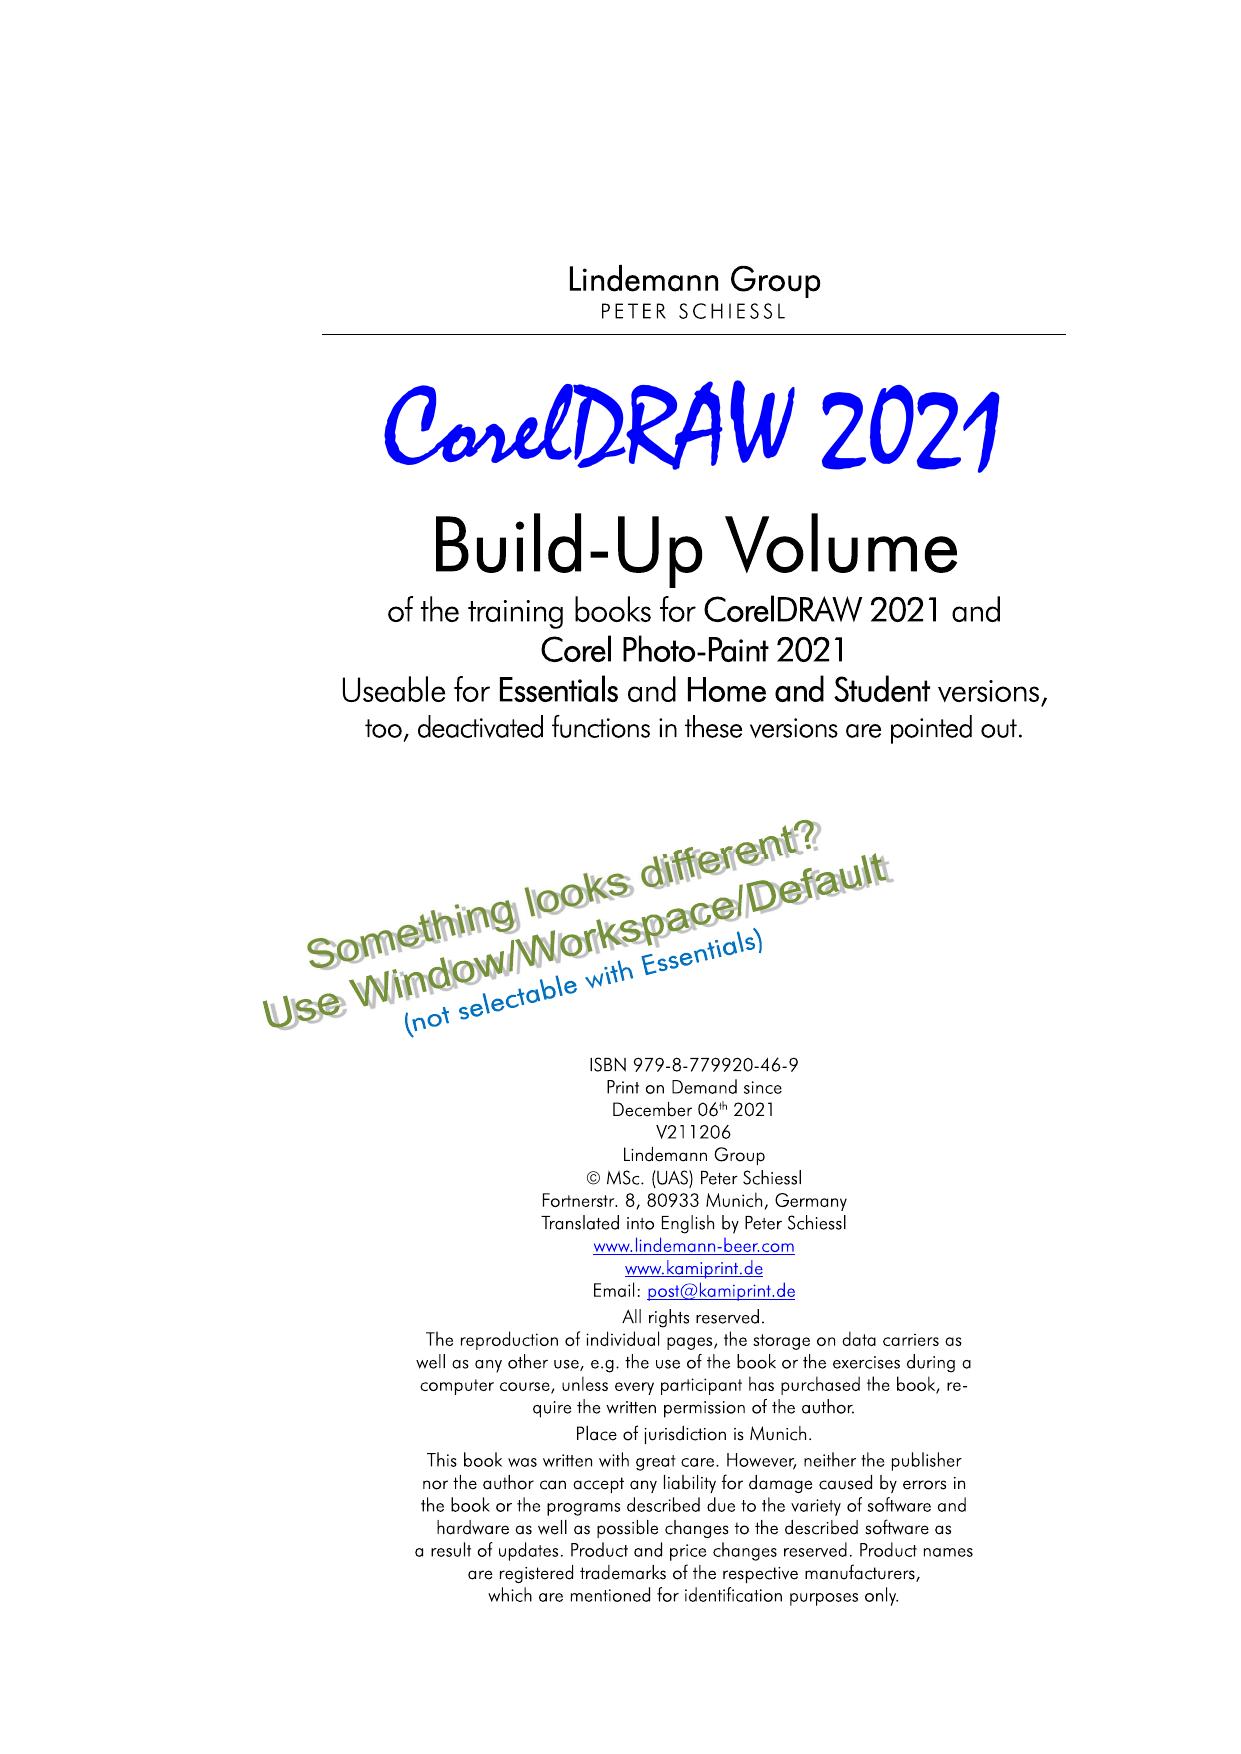 CorelDRAW 2021 Build-Up Volume with many integrated exercises: Build-Up Volume of the training books for CorelDRAW 2021 and Photo-Paint 2021, for Suite, Essentials and Home&Student by Peter Schießl